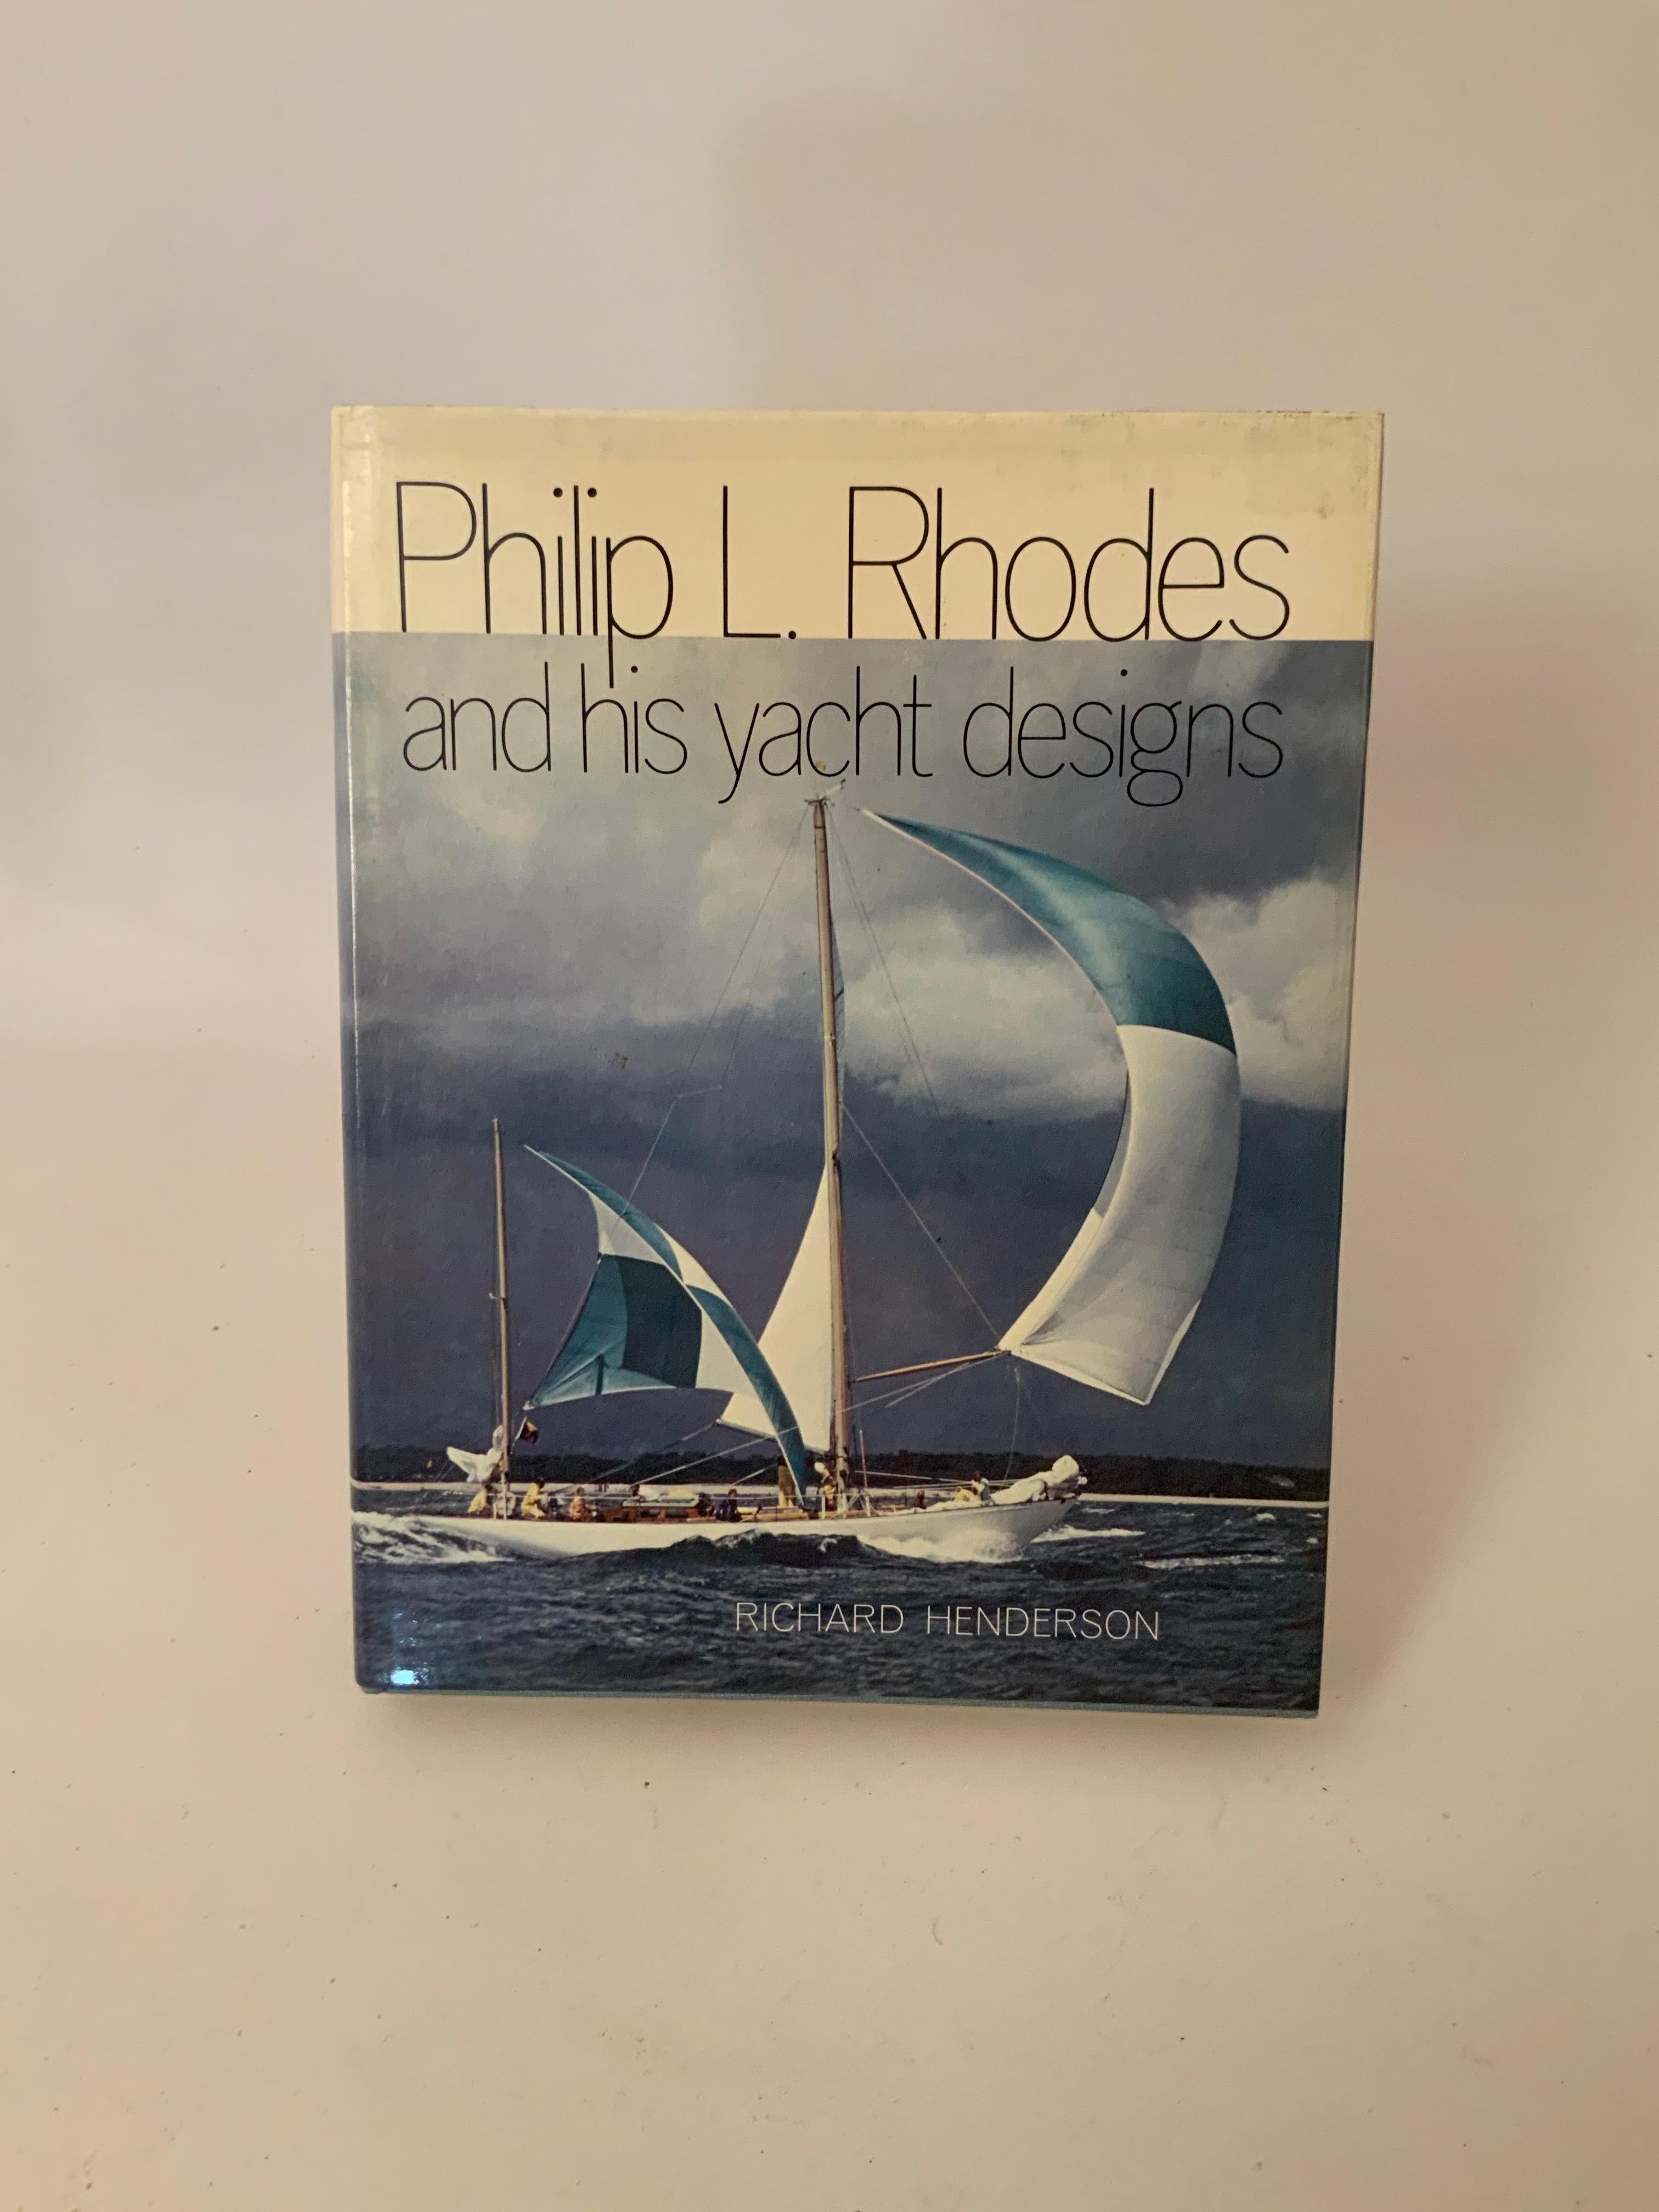 Philip L. Rhodes and His Yacht Designs Hard Cover Book, 1981 1